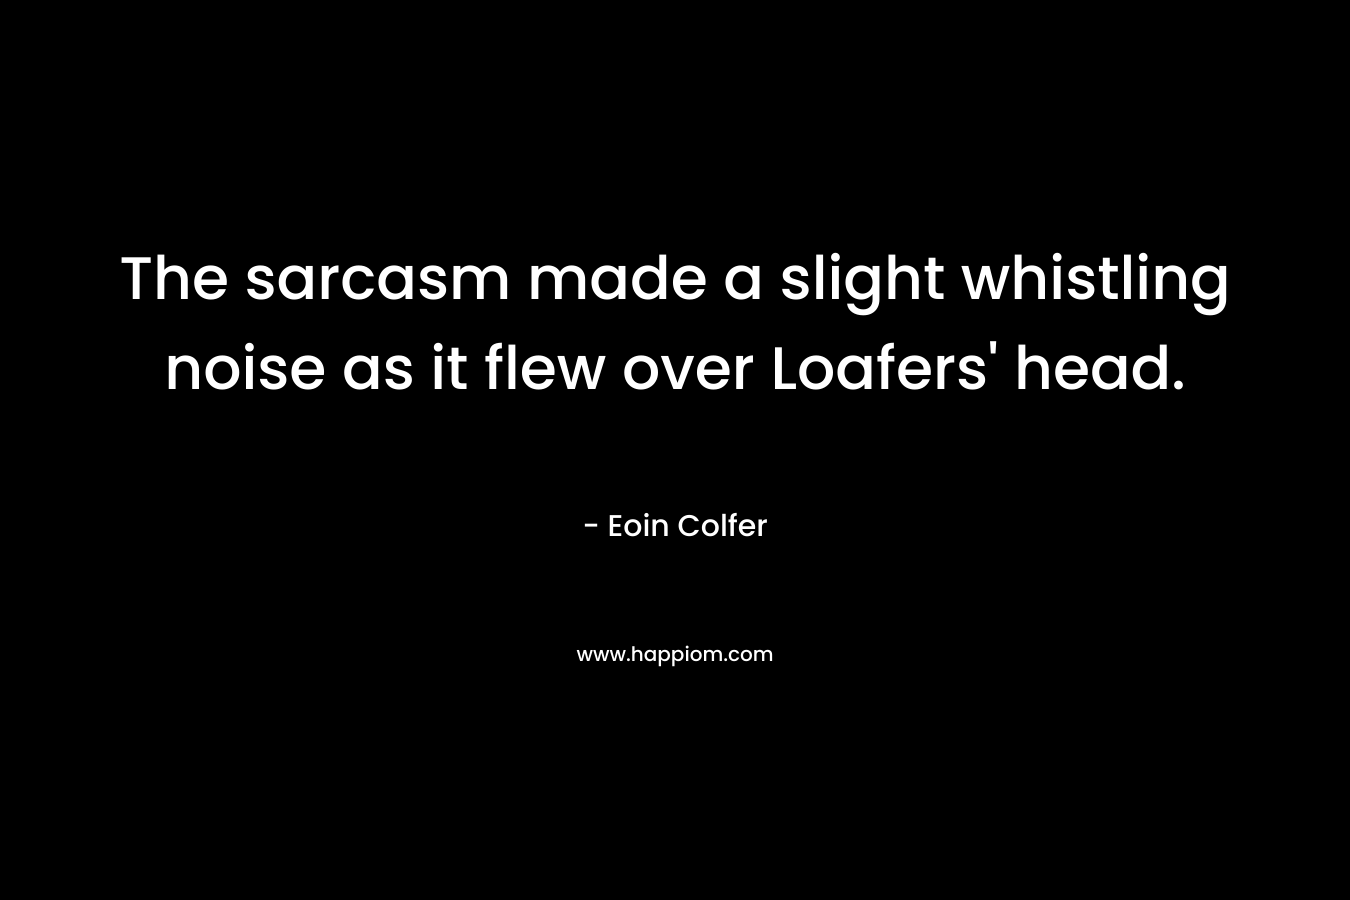 The sarcasm made a slight whistling noise as it flew over Loafers’ head. – Eoin Colfer